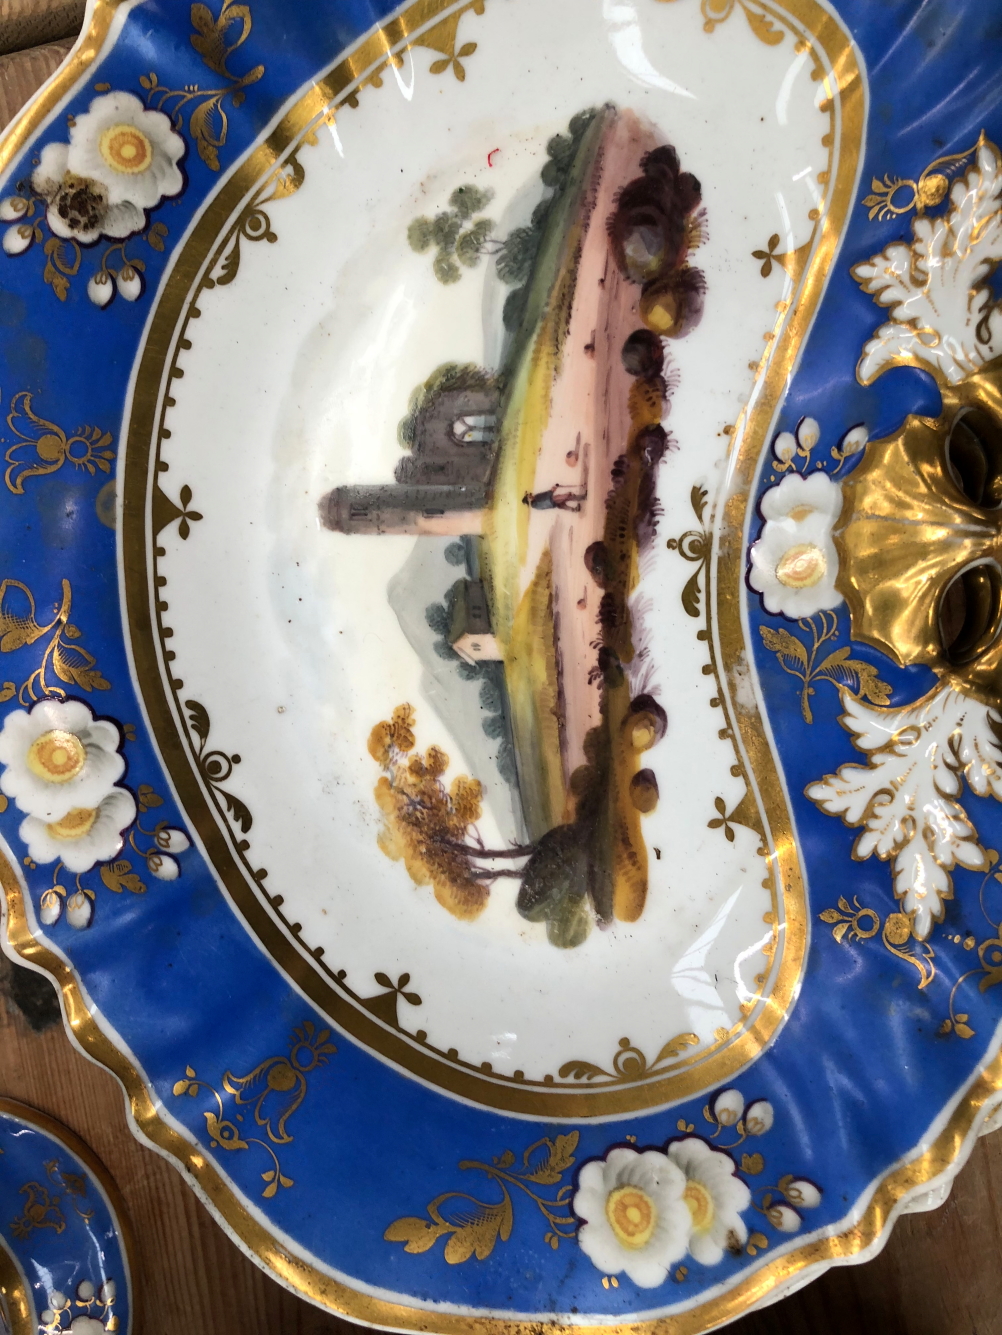 A 19th C. ENGLISH PORCELAIN DESSERT SERVICE PAINTED WITH LANDSCAPES WITHIN GILT BLUE BANDS - Image 7 of 27